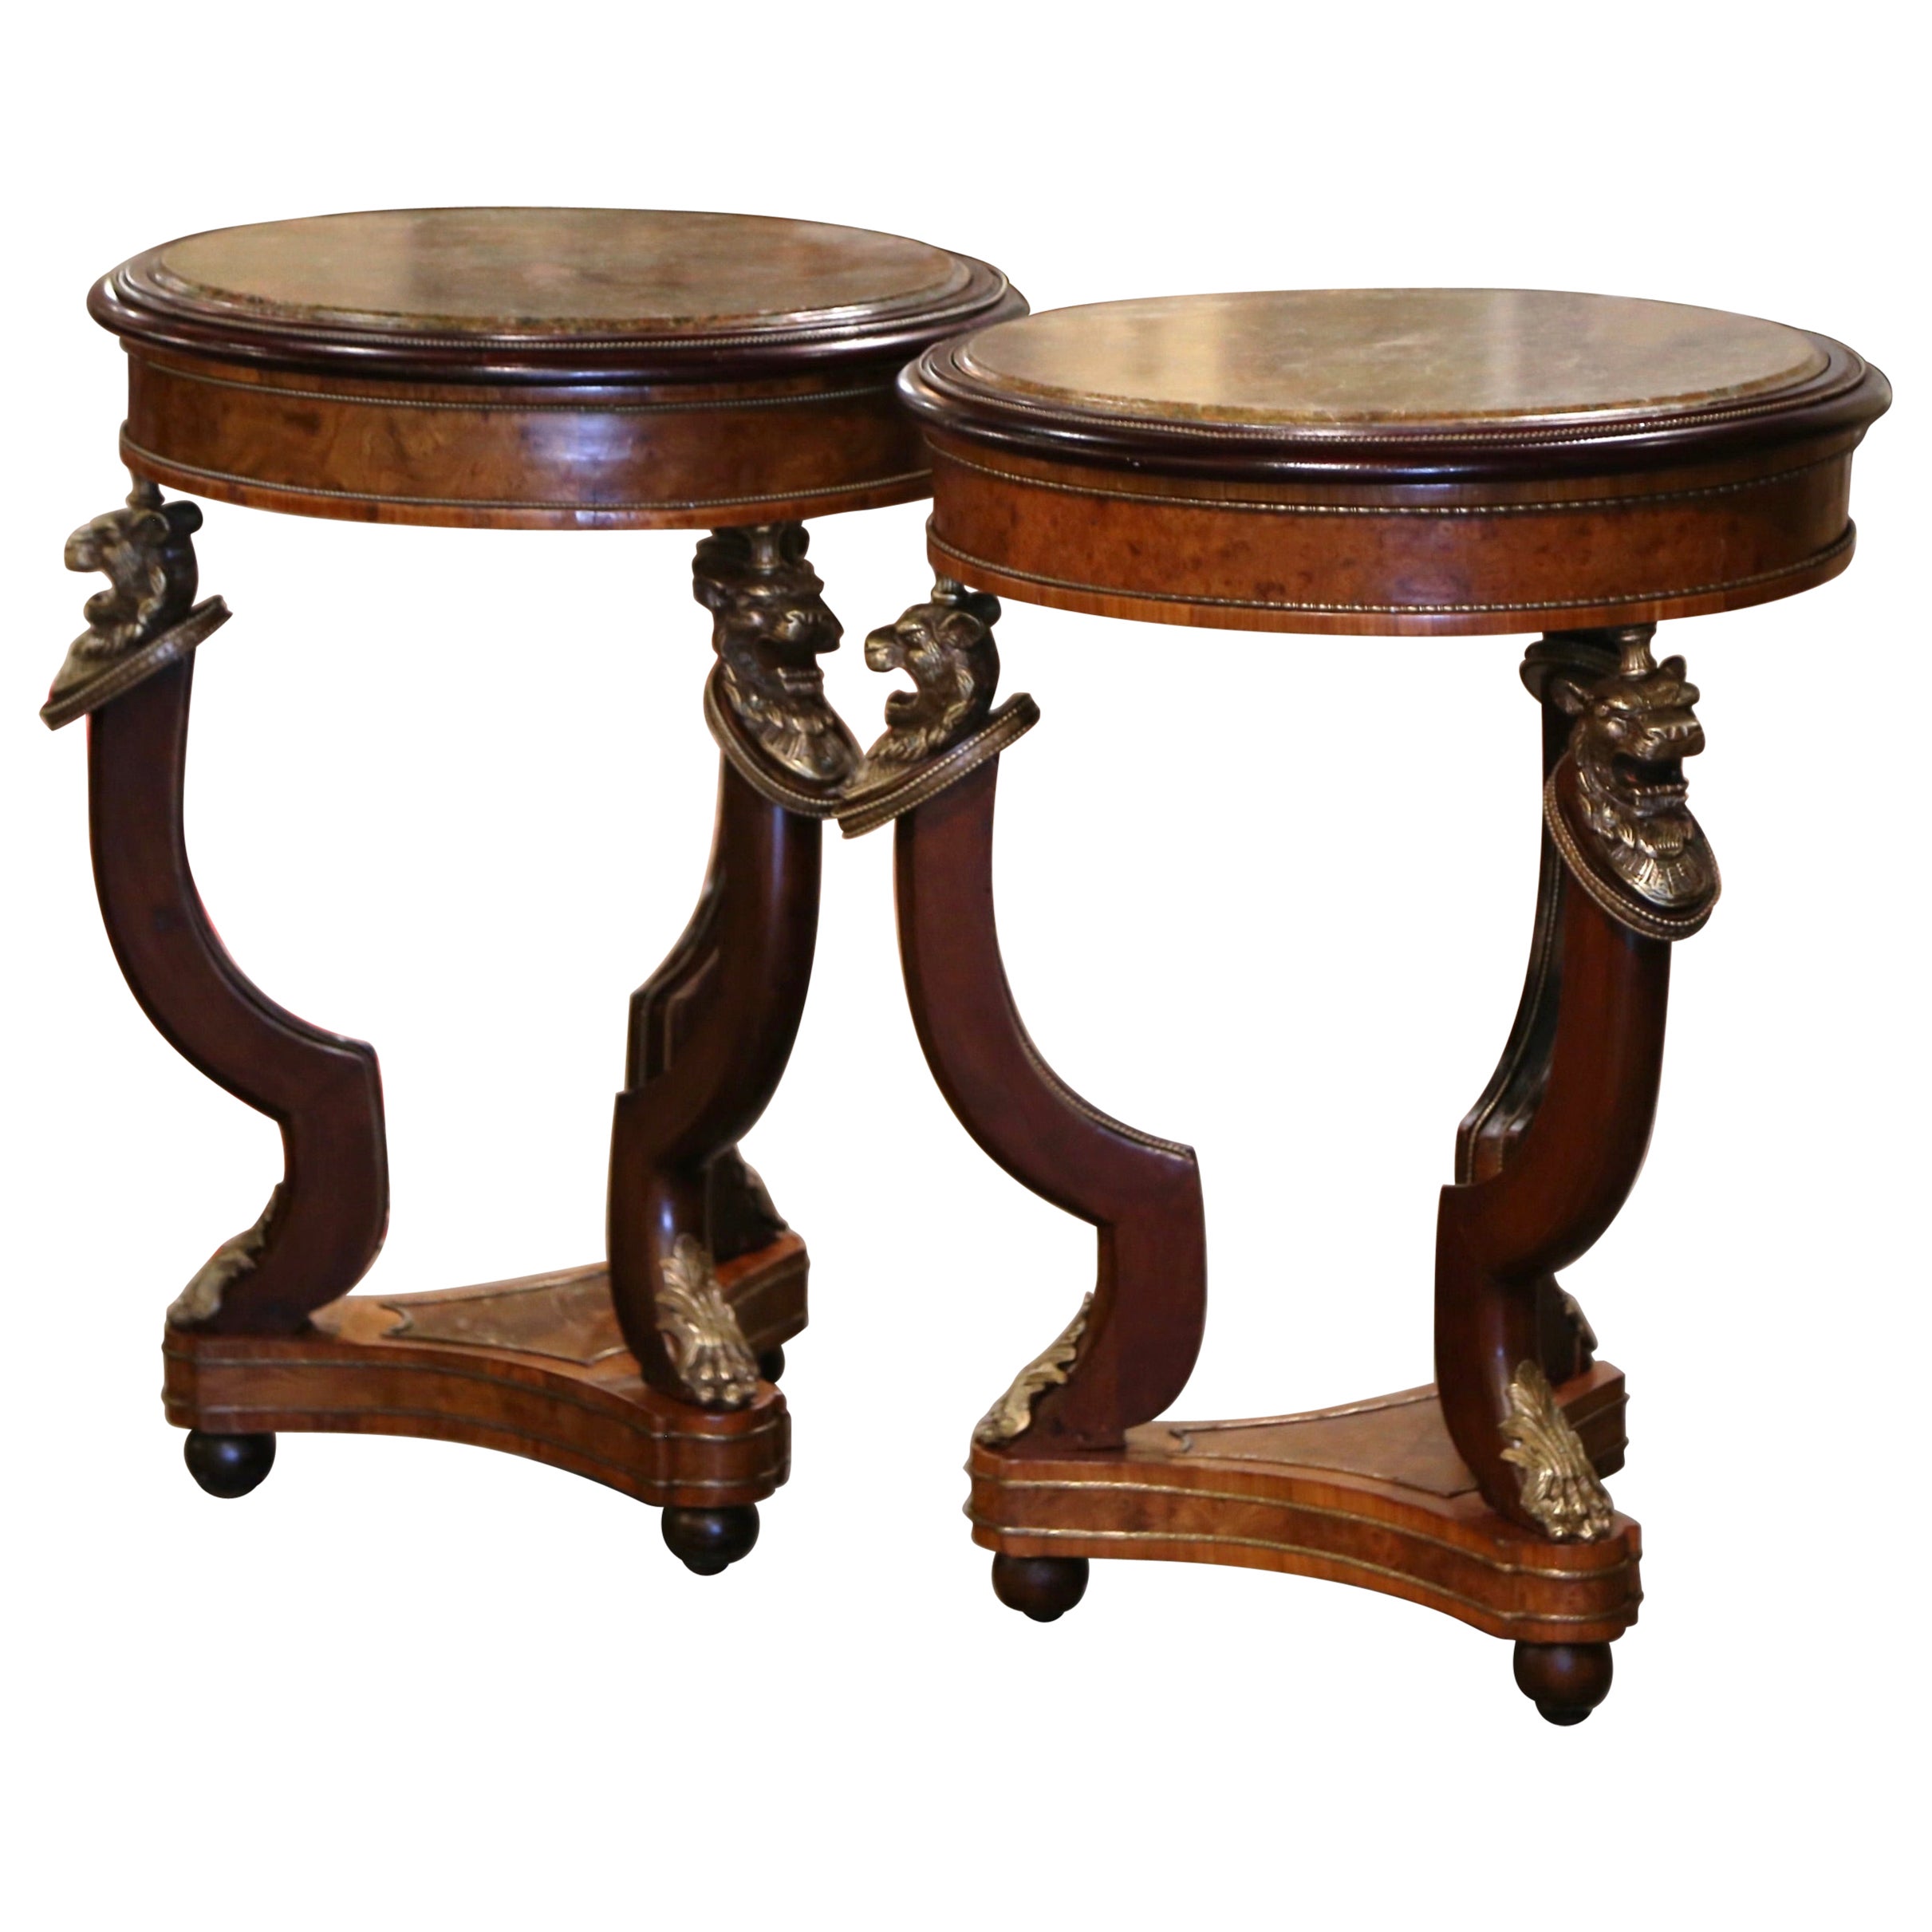 Pair of 19th Century French Marble Top Carved Burl Walnut Gueridon Tables For Sale